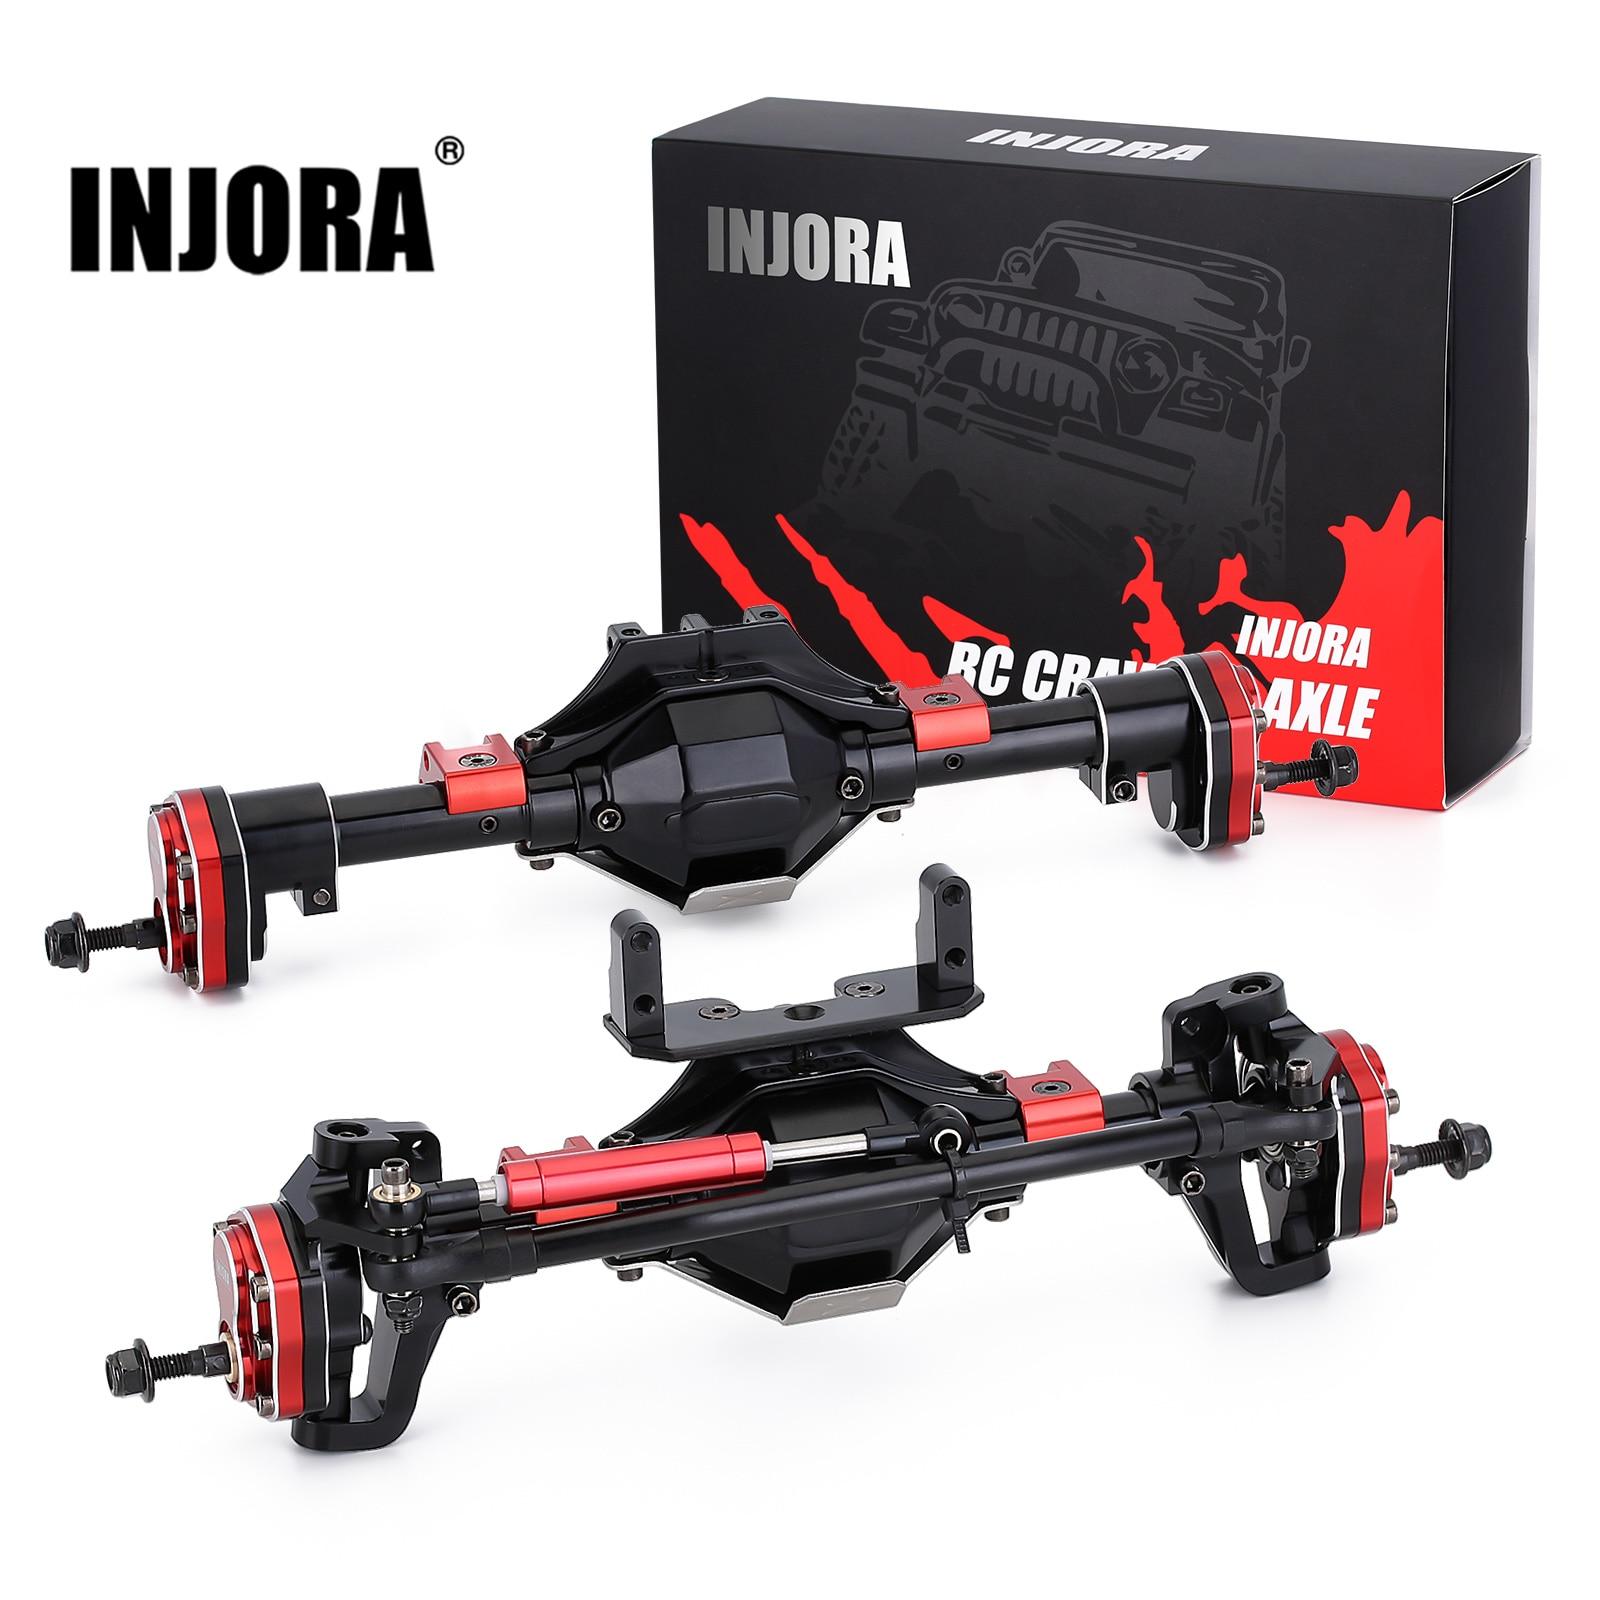 INJORA-Metal-Portal-Axle-with-Protector-Front-Rear-for-1-10-RC-Crawler-Car-Axial-SCX10.jpg